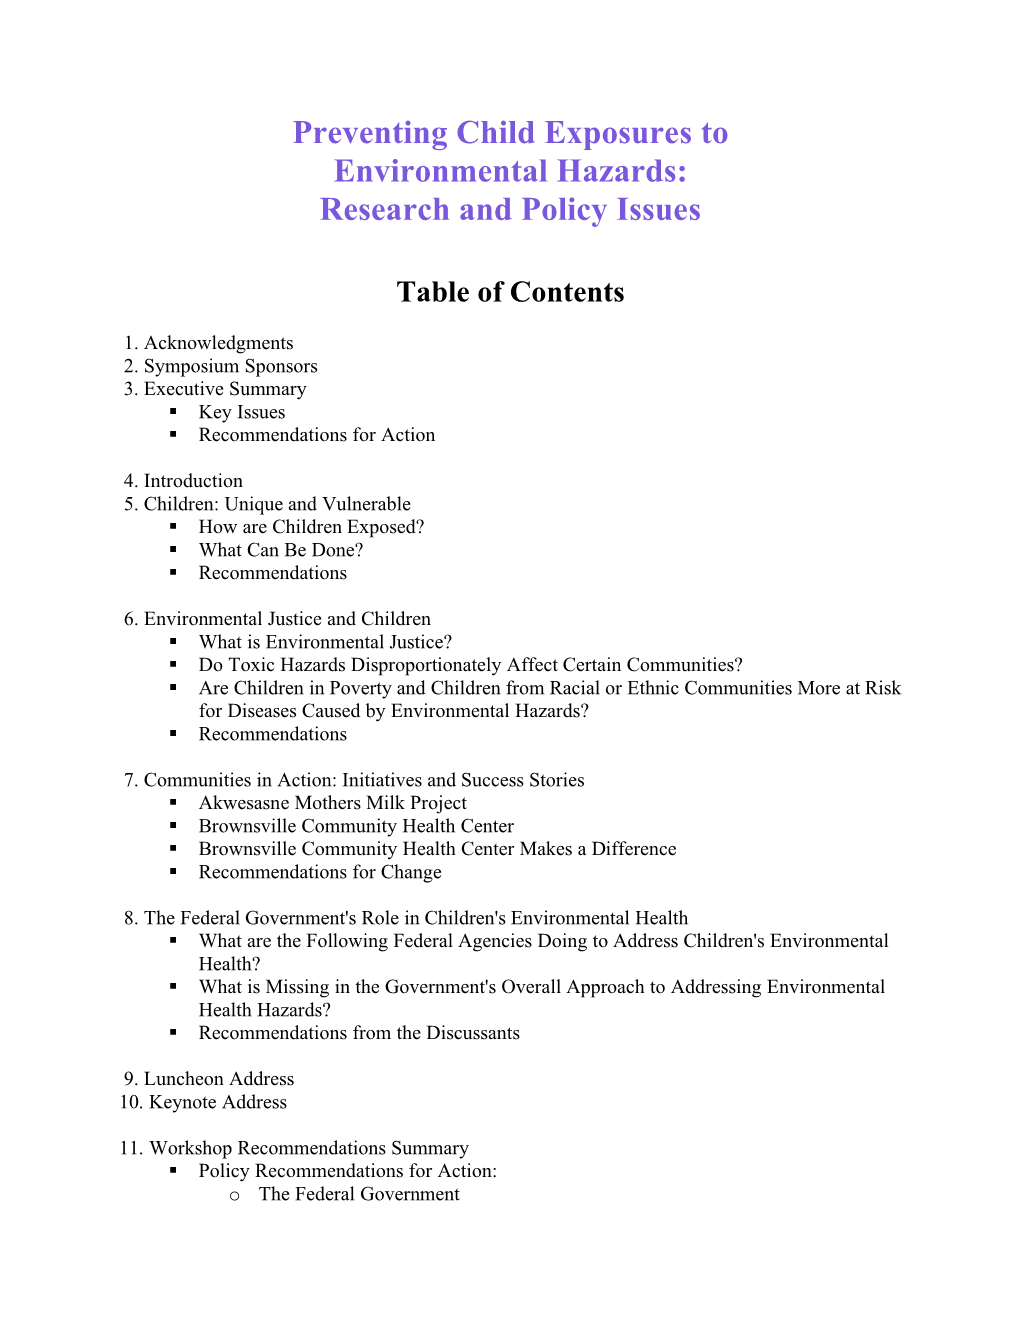 Preventing Child Exposures to Environmental Hazards: Research and Policy Issues